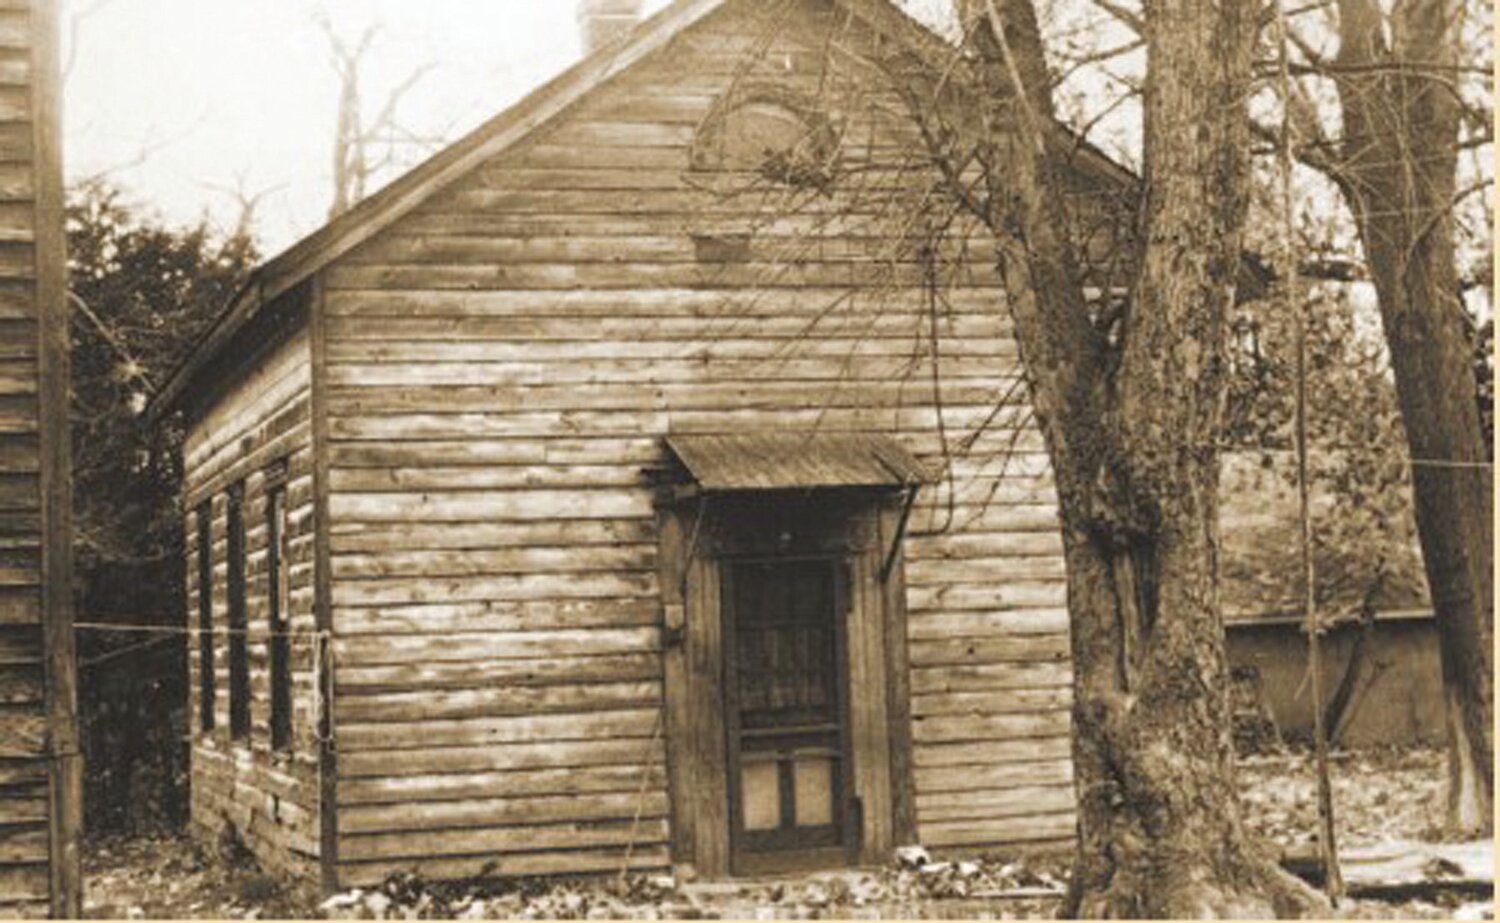 This John Wesley African Methodist Episcopal Church structure, shown here circa 1895, was the fourth building in Newtown to house an A.M.E. church. The other three were burned in 1821, 1840 and 1857. Undeterred, members of the African American community rebuilt.